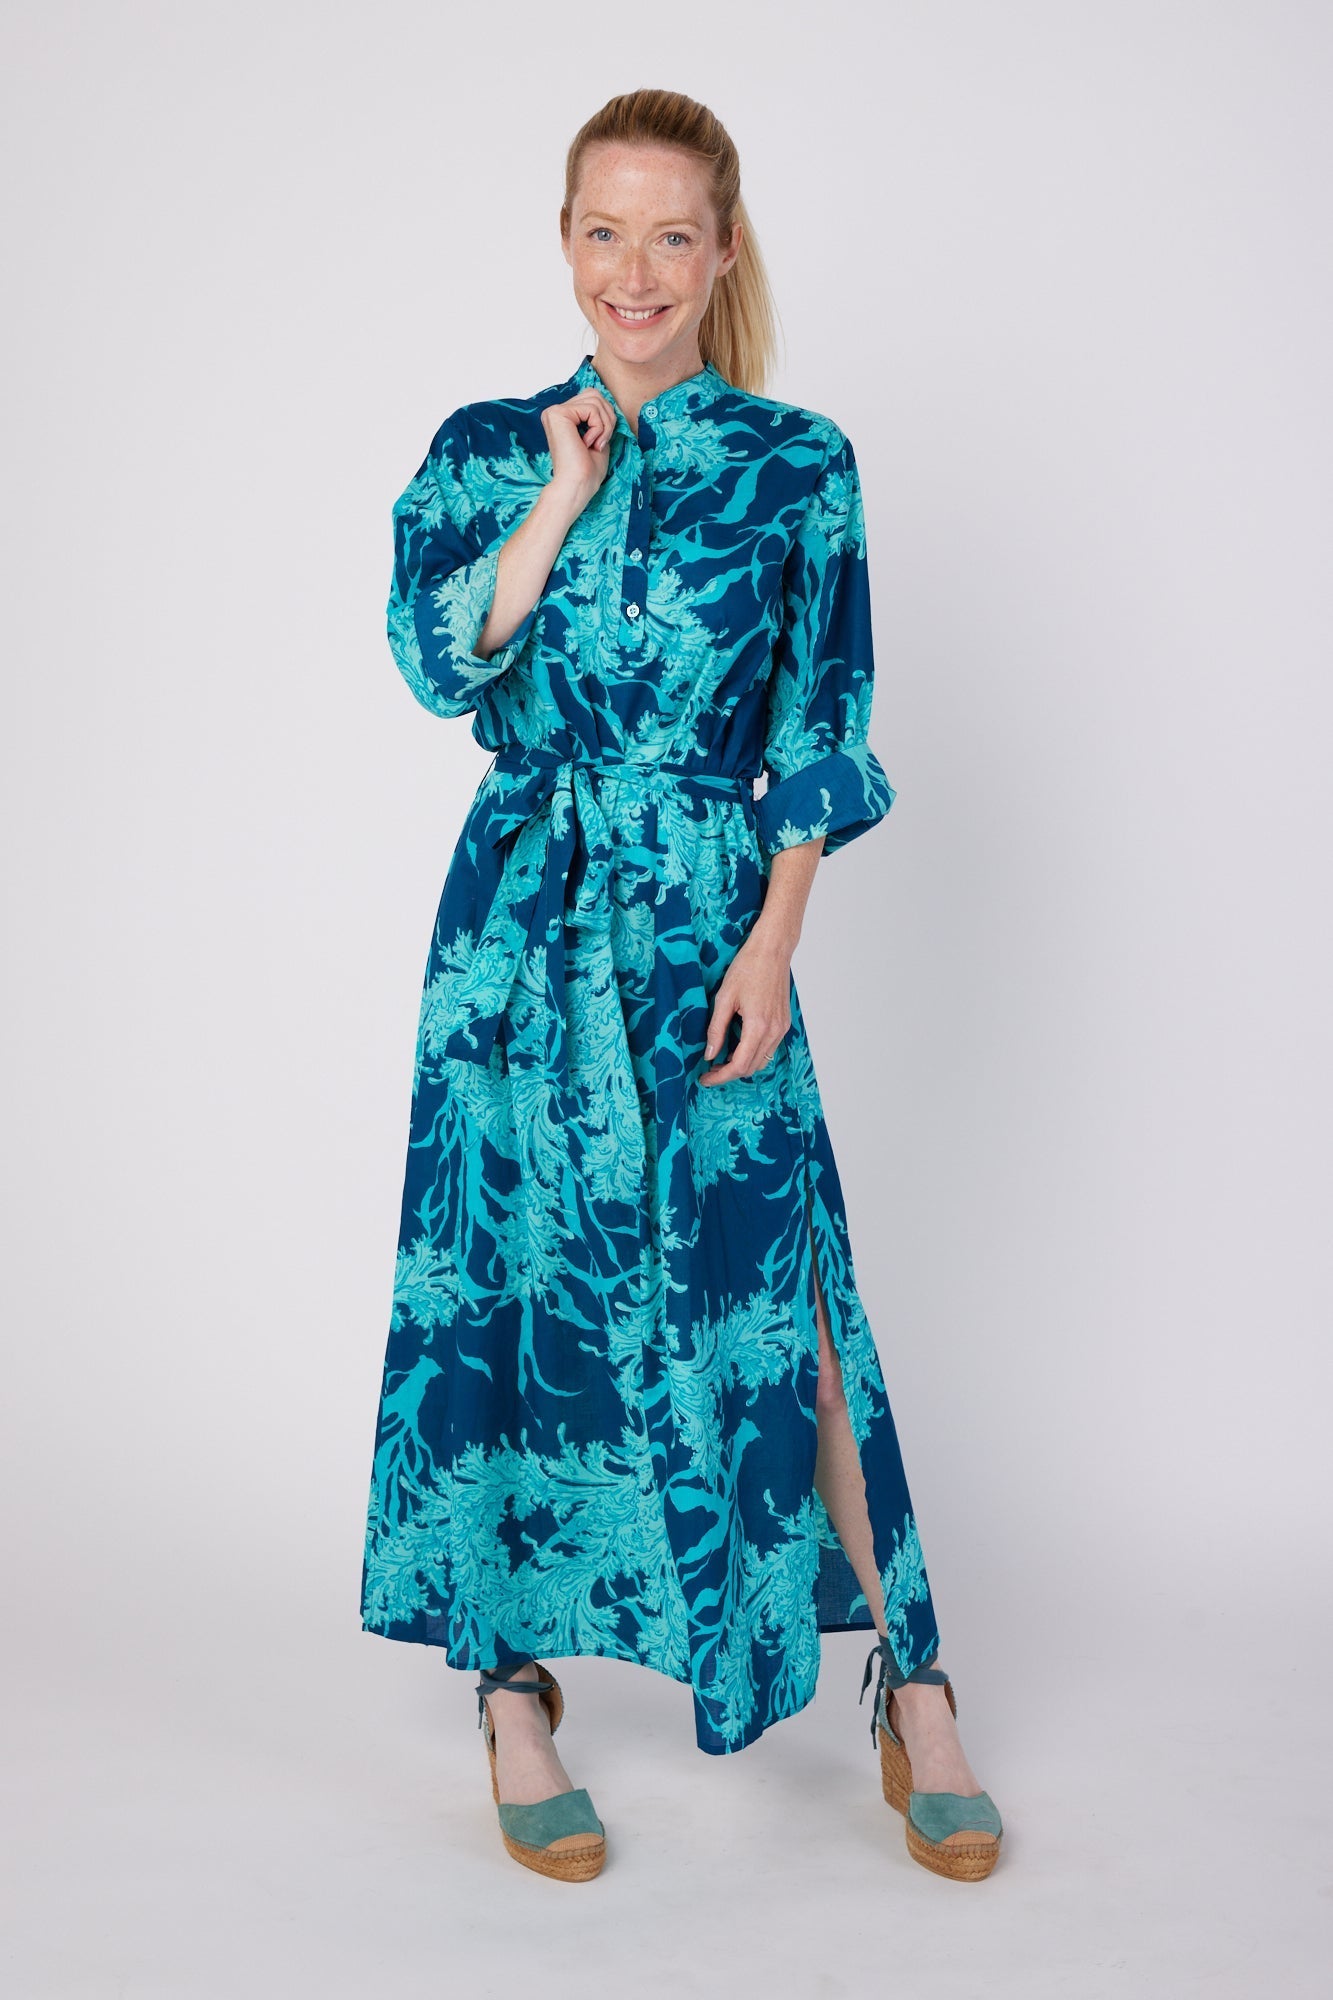 ModaPosa Elina 3/4 Sleeve Maxi Caftan Dress with Detachable Belt in Navy Aqua Coral . Discover women's resort dresses and lifestyle clothing inspired by the Mediterranean. Free worldwide shipping available!